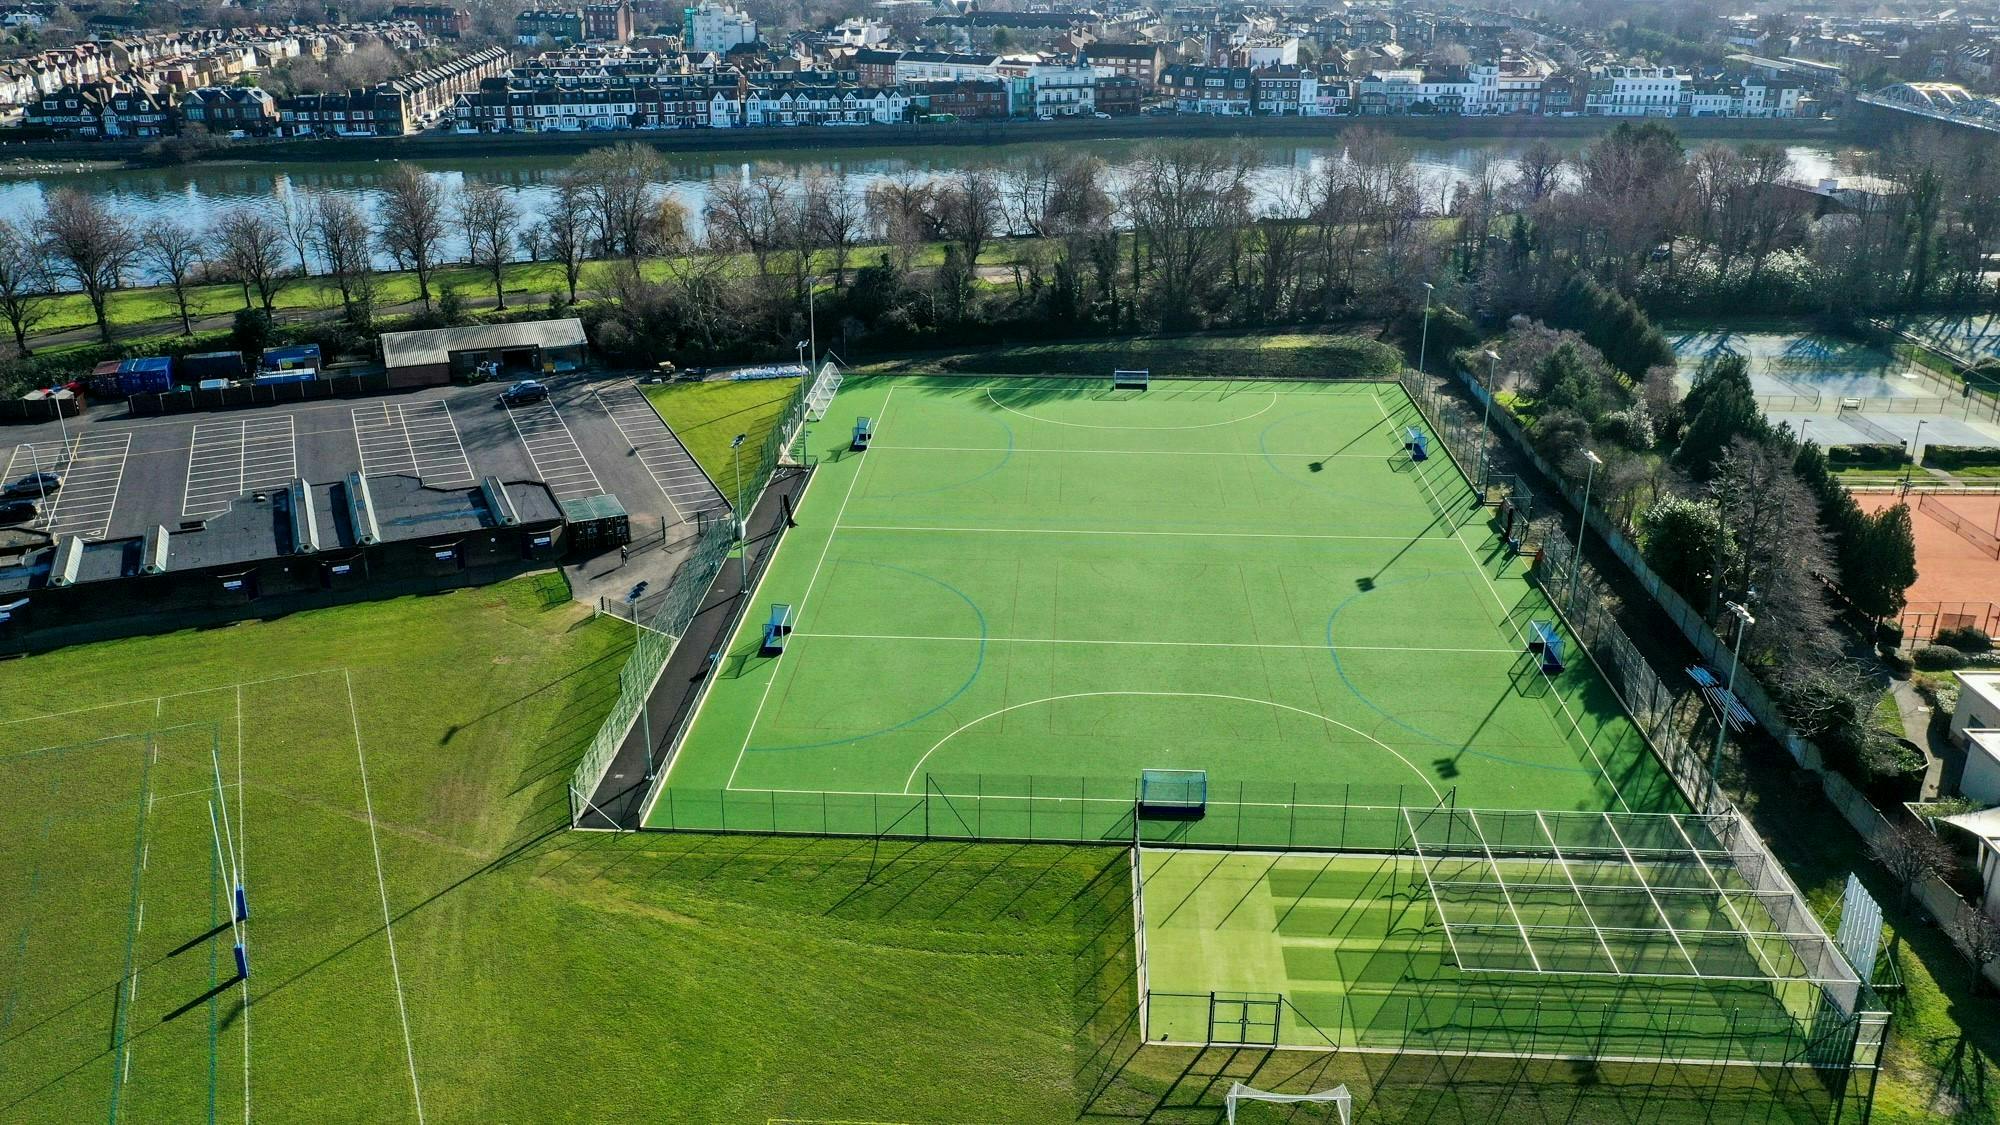 King's House Sports Ground in Chiswick as seen from above with a 3G ptich front and centre and the Rive Thames in the background behind a row of trees